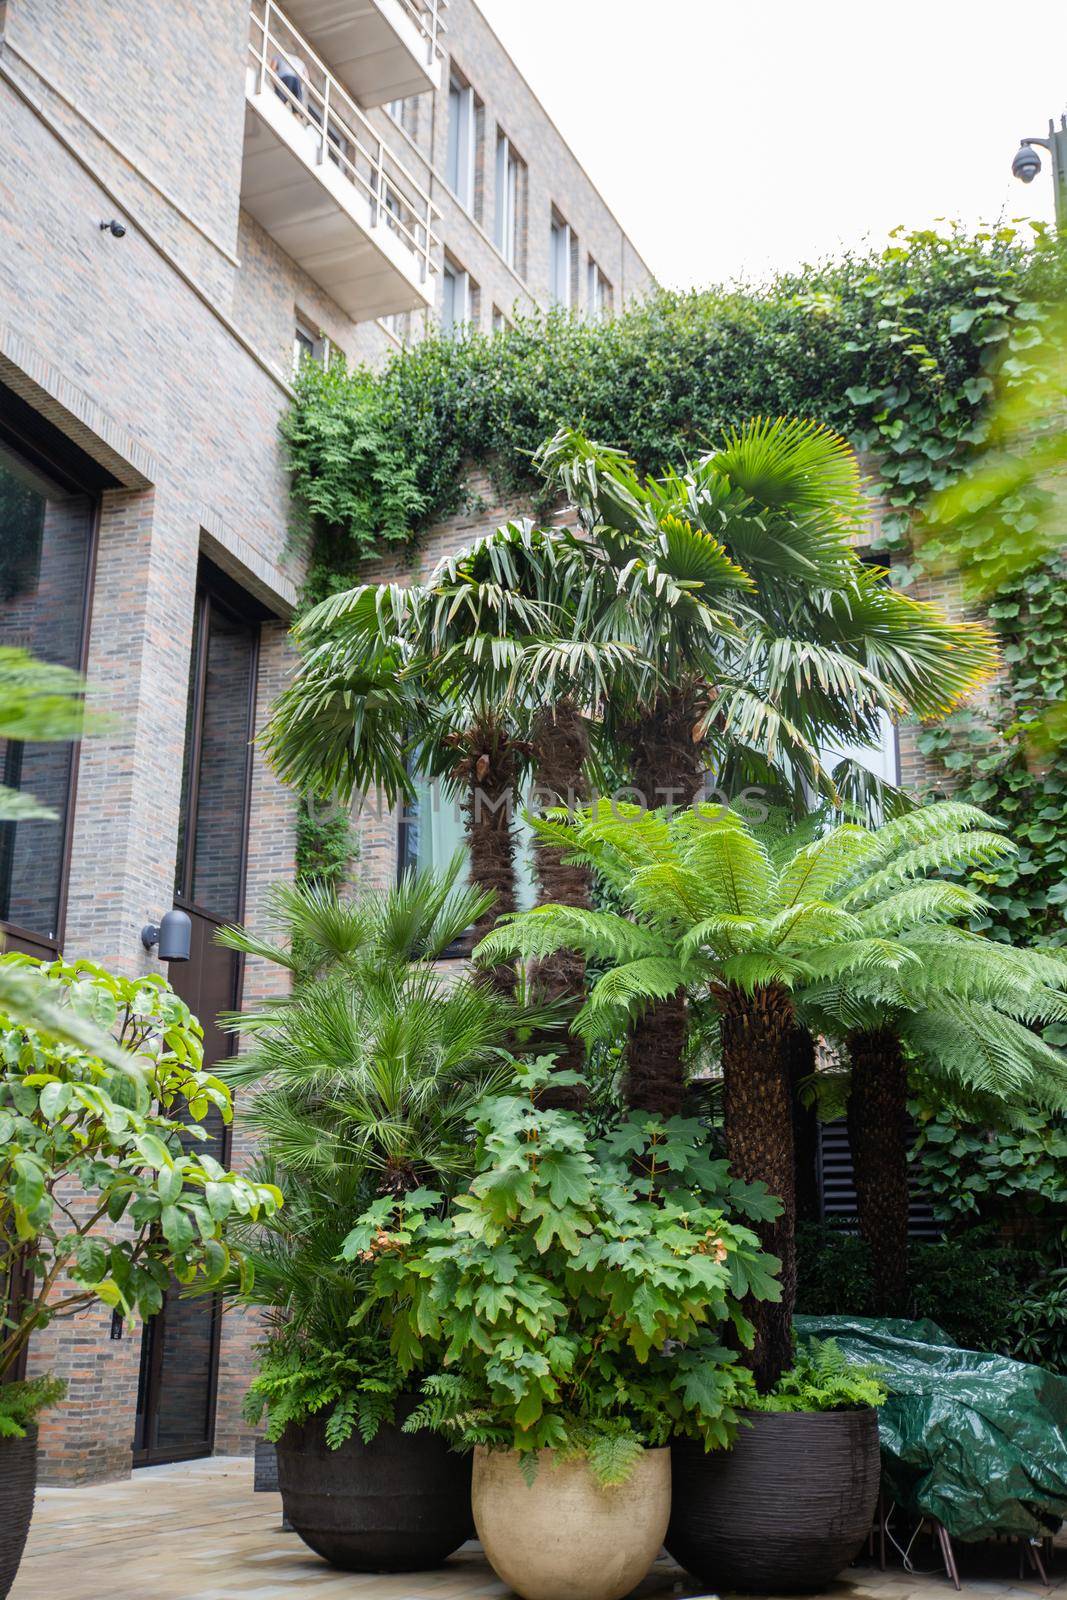 Plants and small palm trees down the stairs and at the entrance of gray building. Door of building with modern architecture surrounded by nature. Houseplants in the city